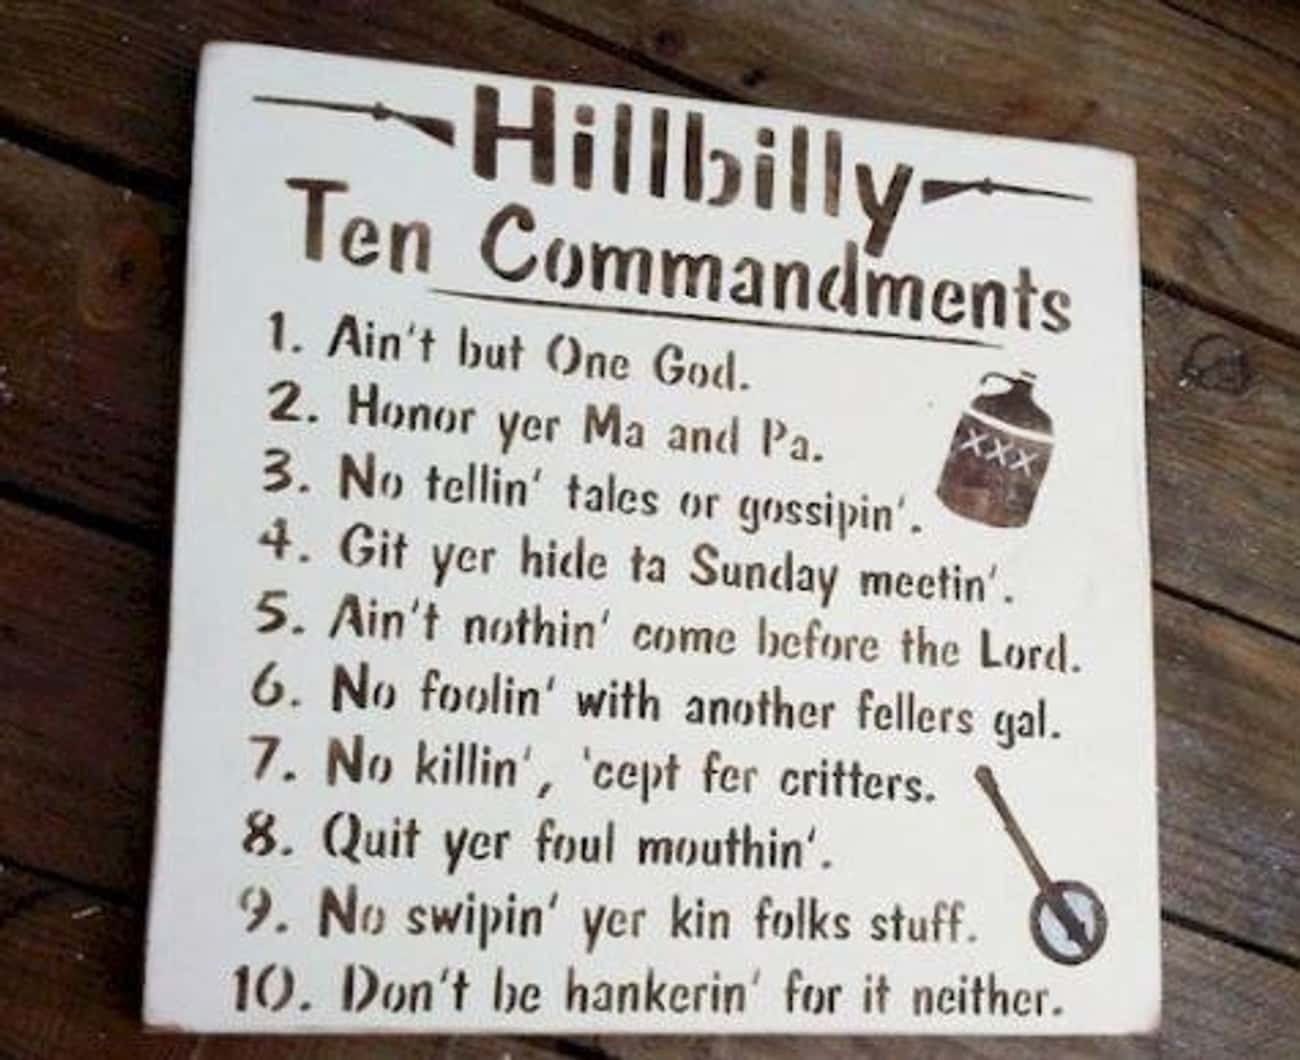 They Got Different Commandments In The South